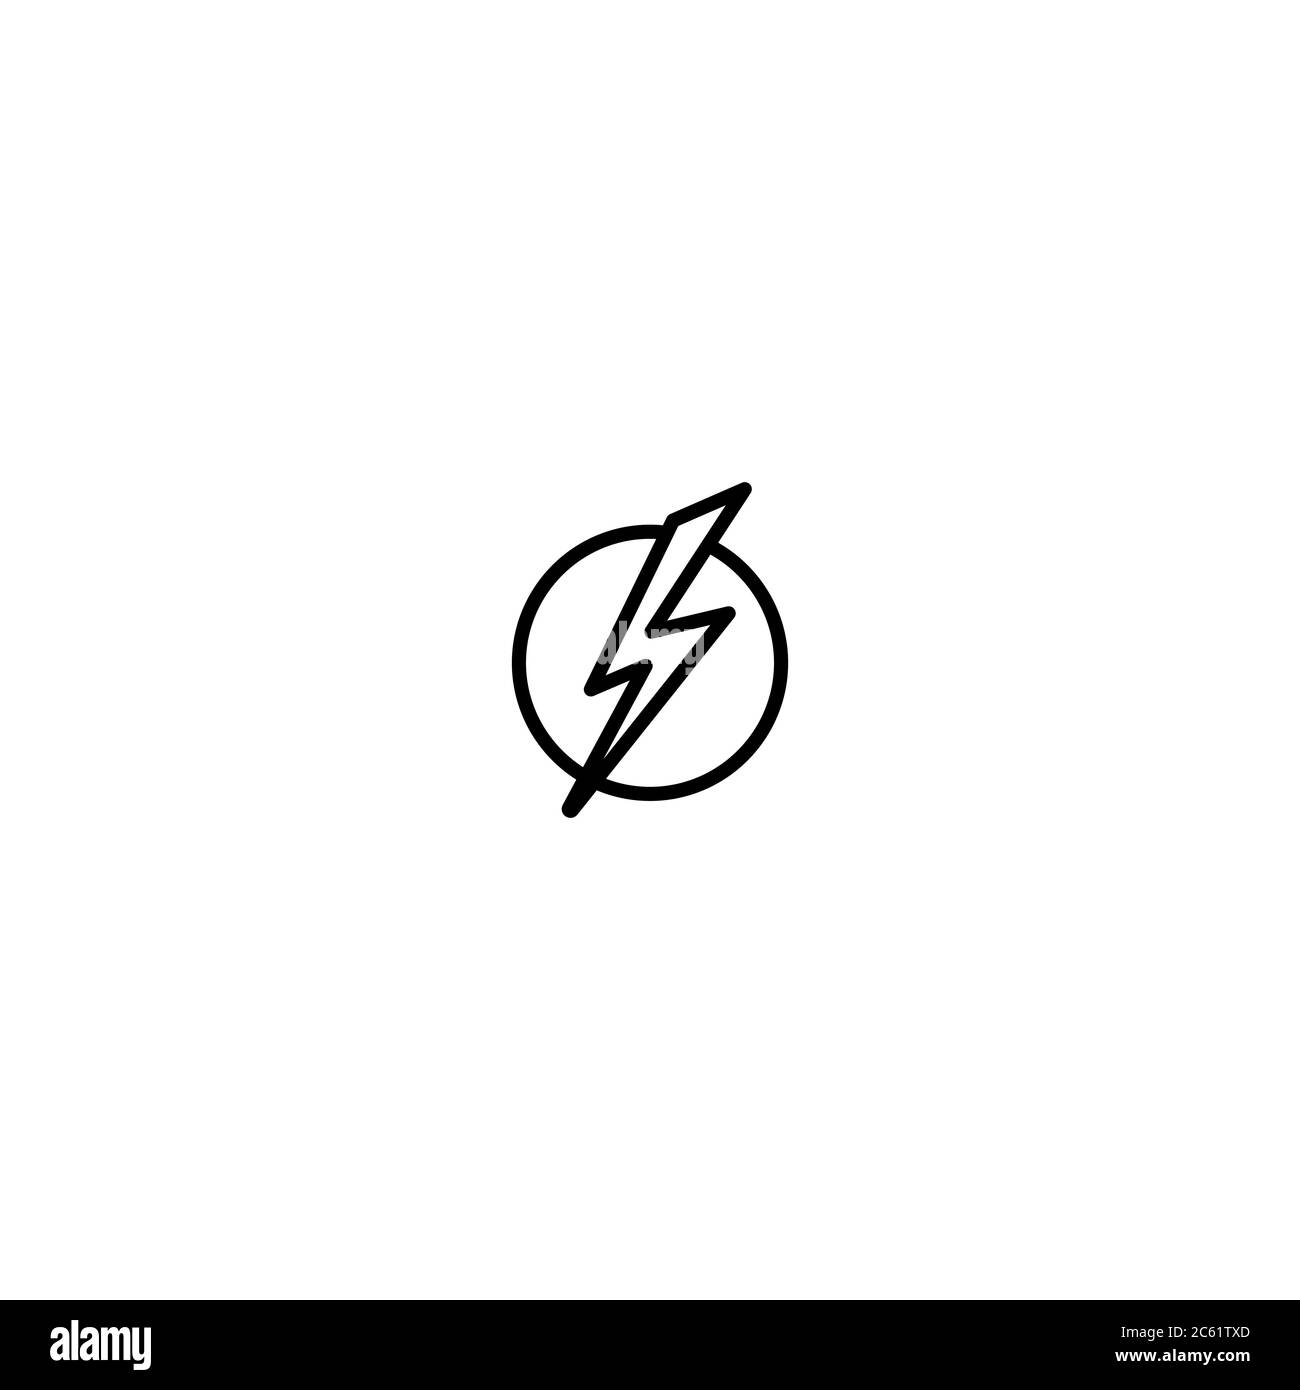 Black lightning bolt in circle simple flat icon. storm or thunder and lightning strike sign isolated on white. High electricity voltage symbol. Vetor Stock Vector